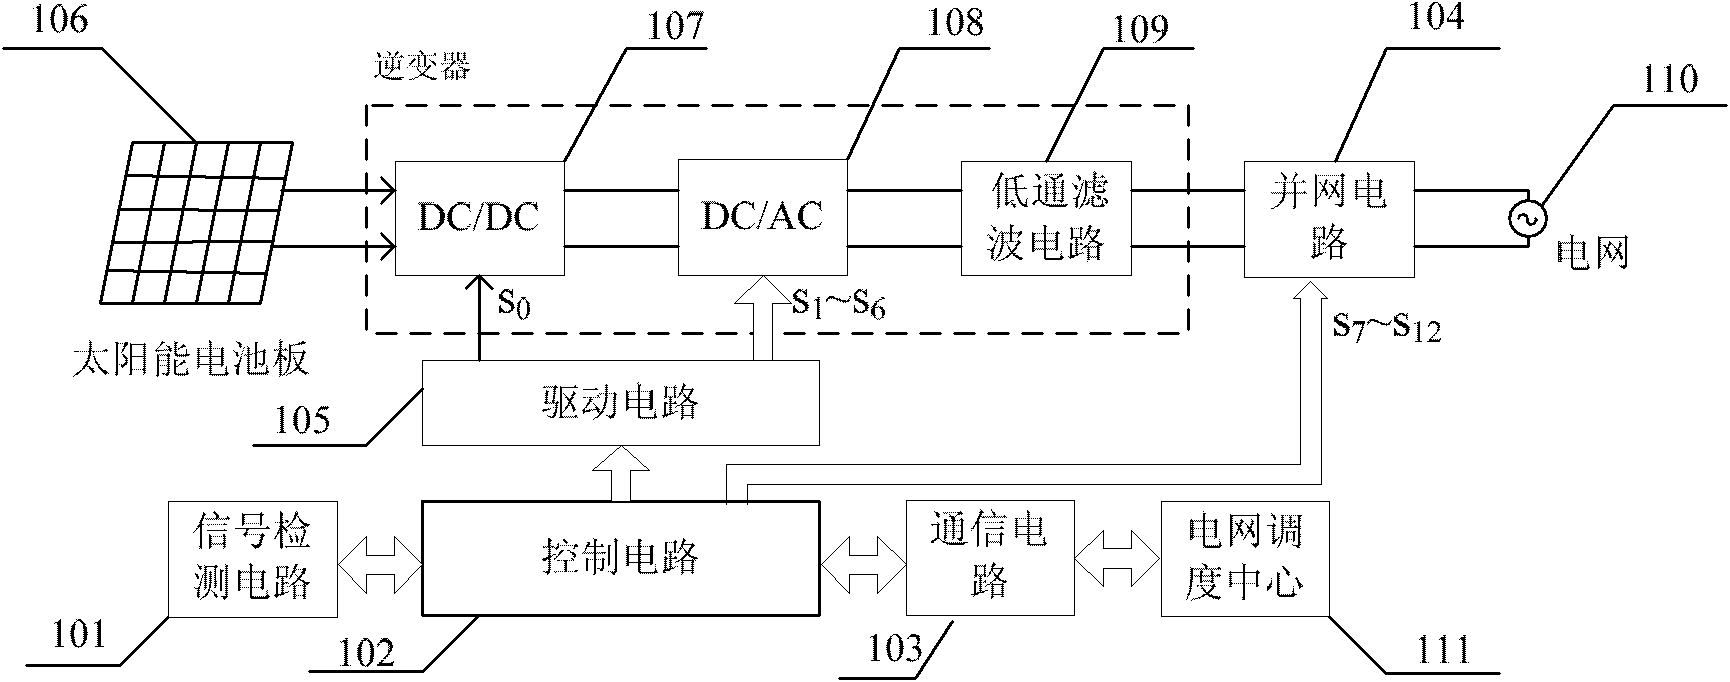 Solar photovoltaic grid-connected inversion control system based on field programmable gate array (FPGA)